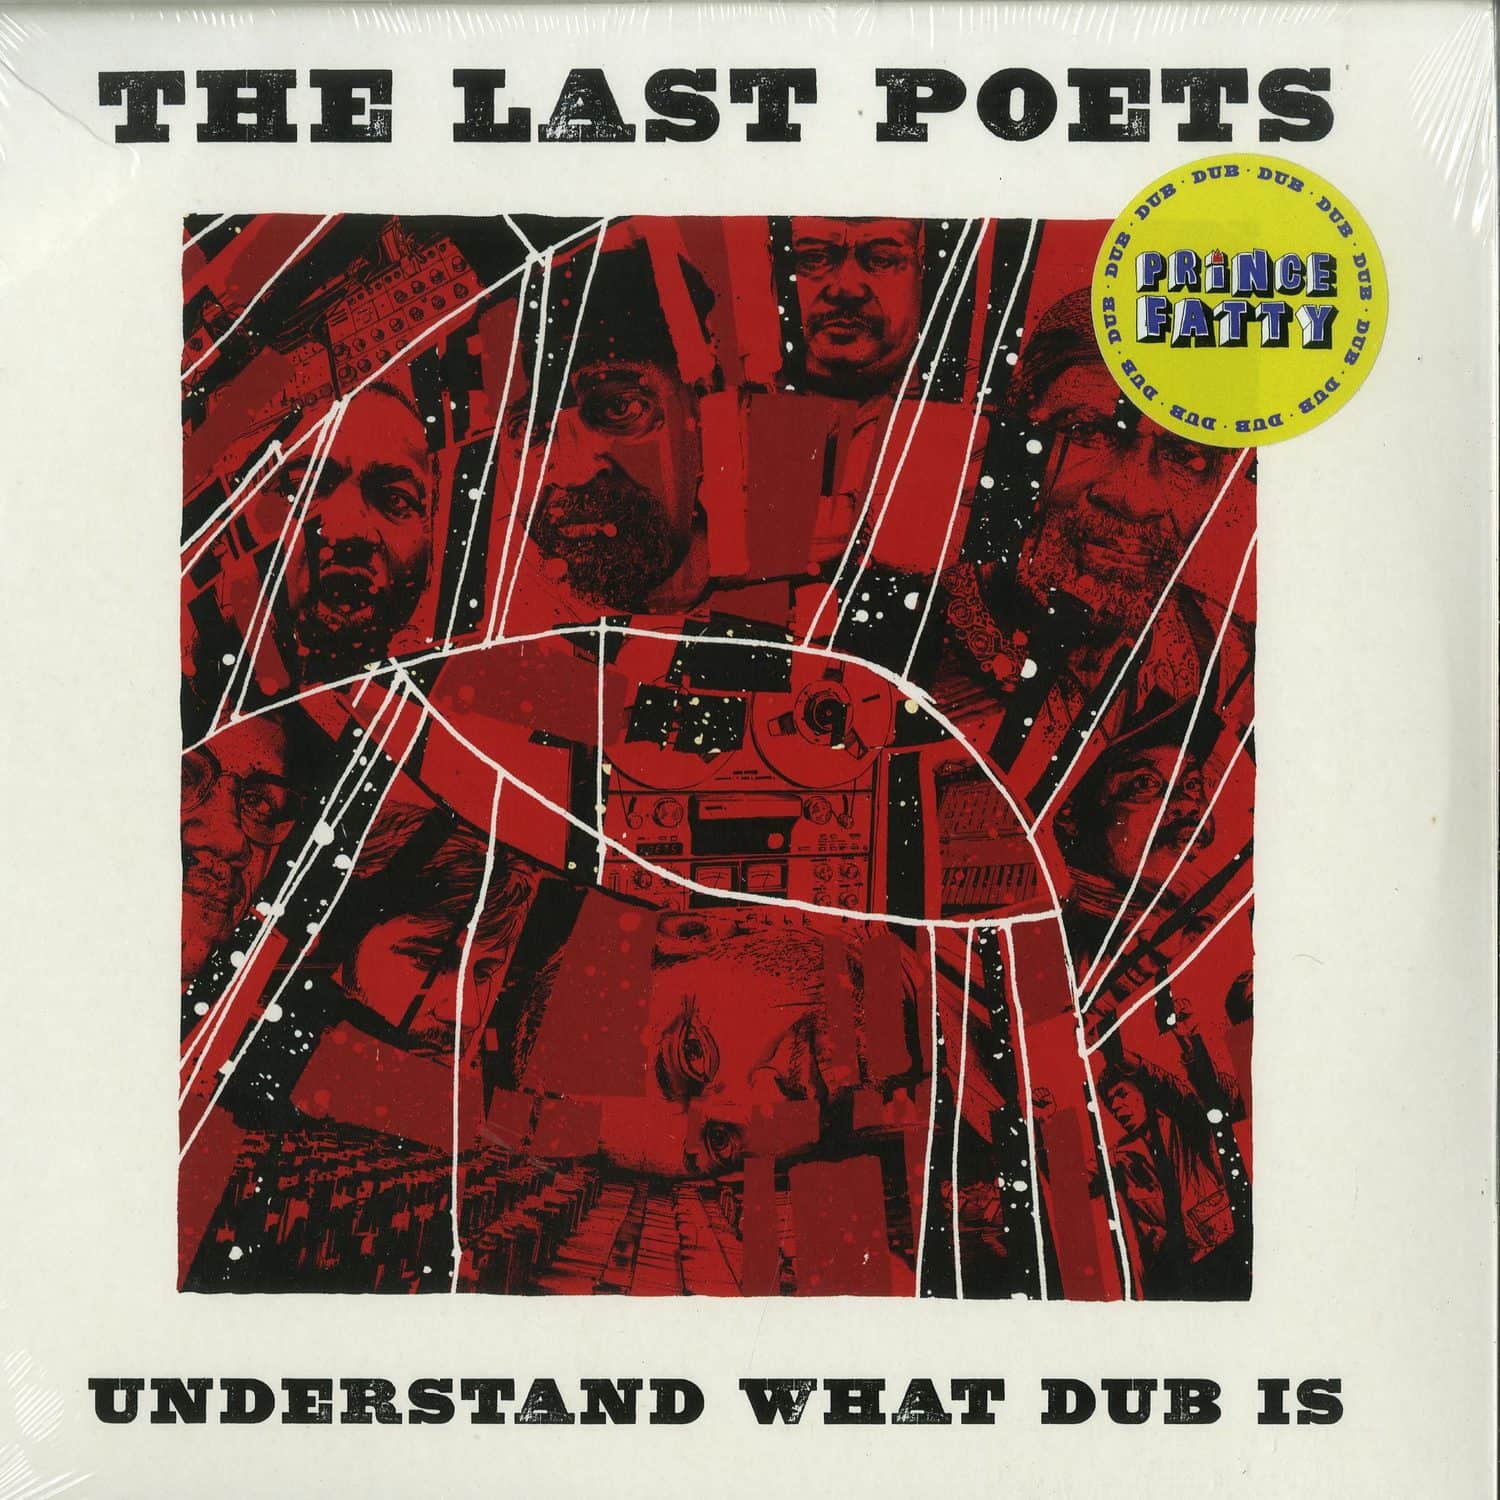 The Last Poets ft. Prince Fatty - UNDERSTAND WHAT DUB IS 